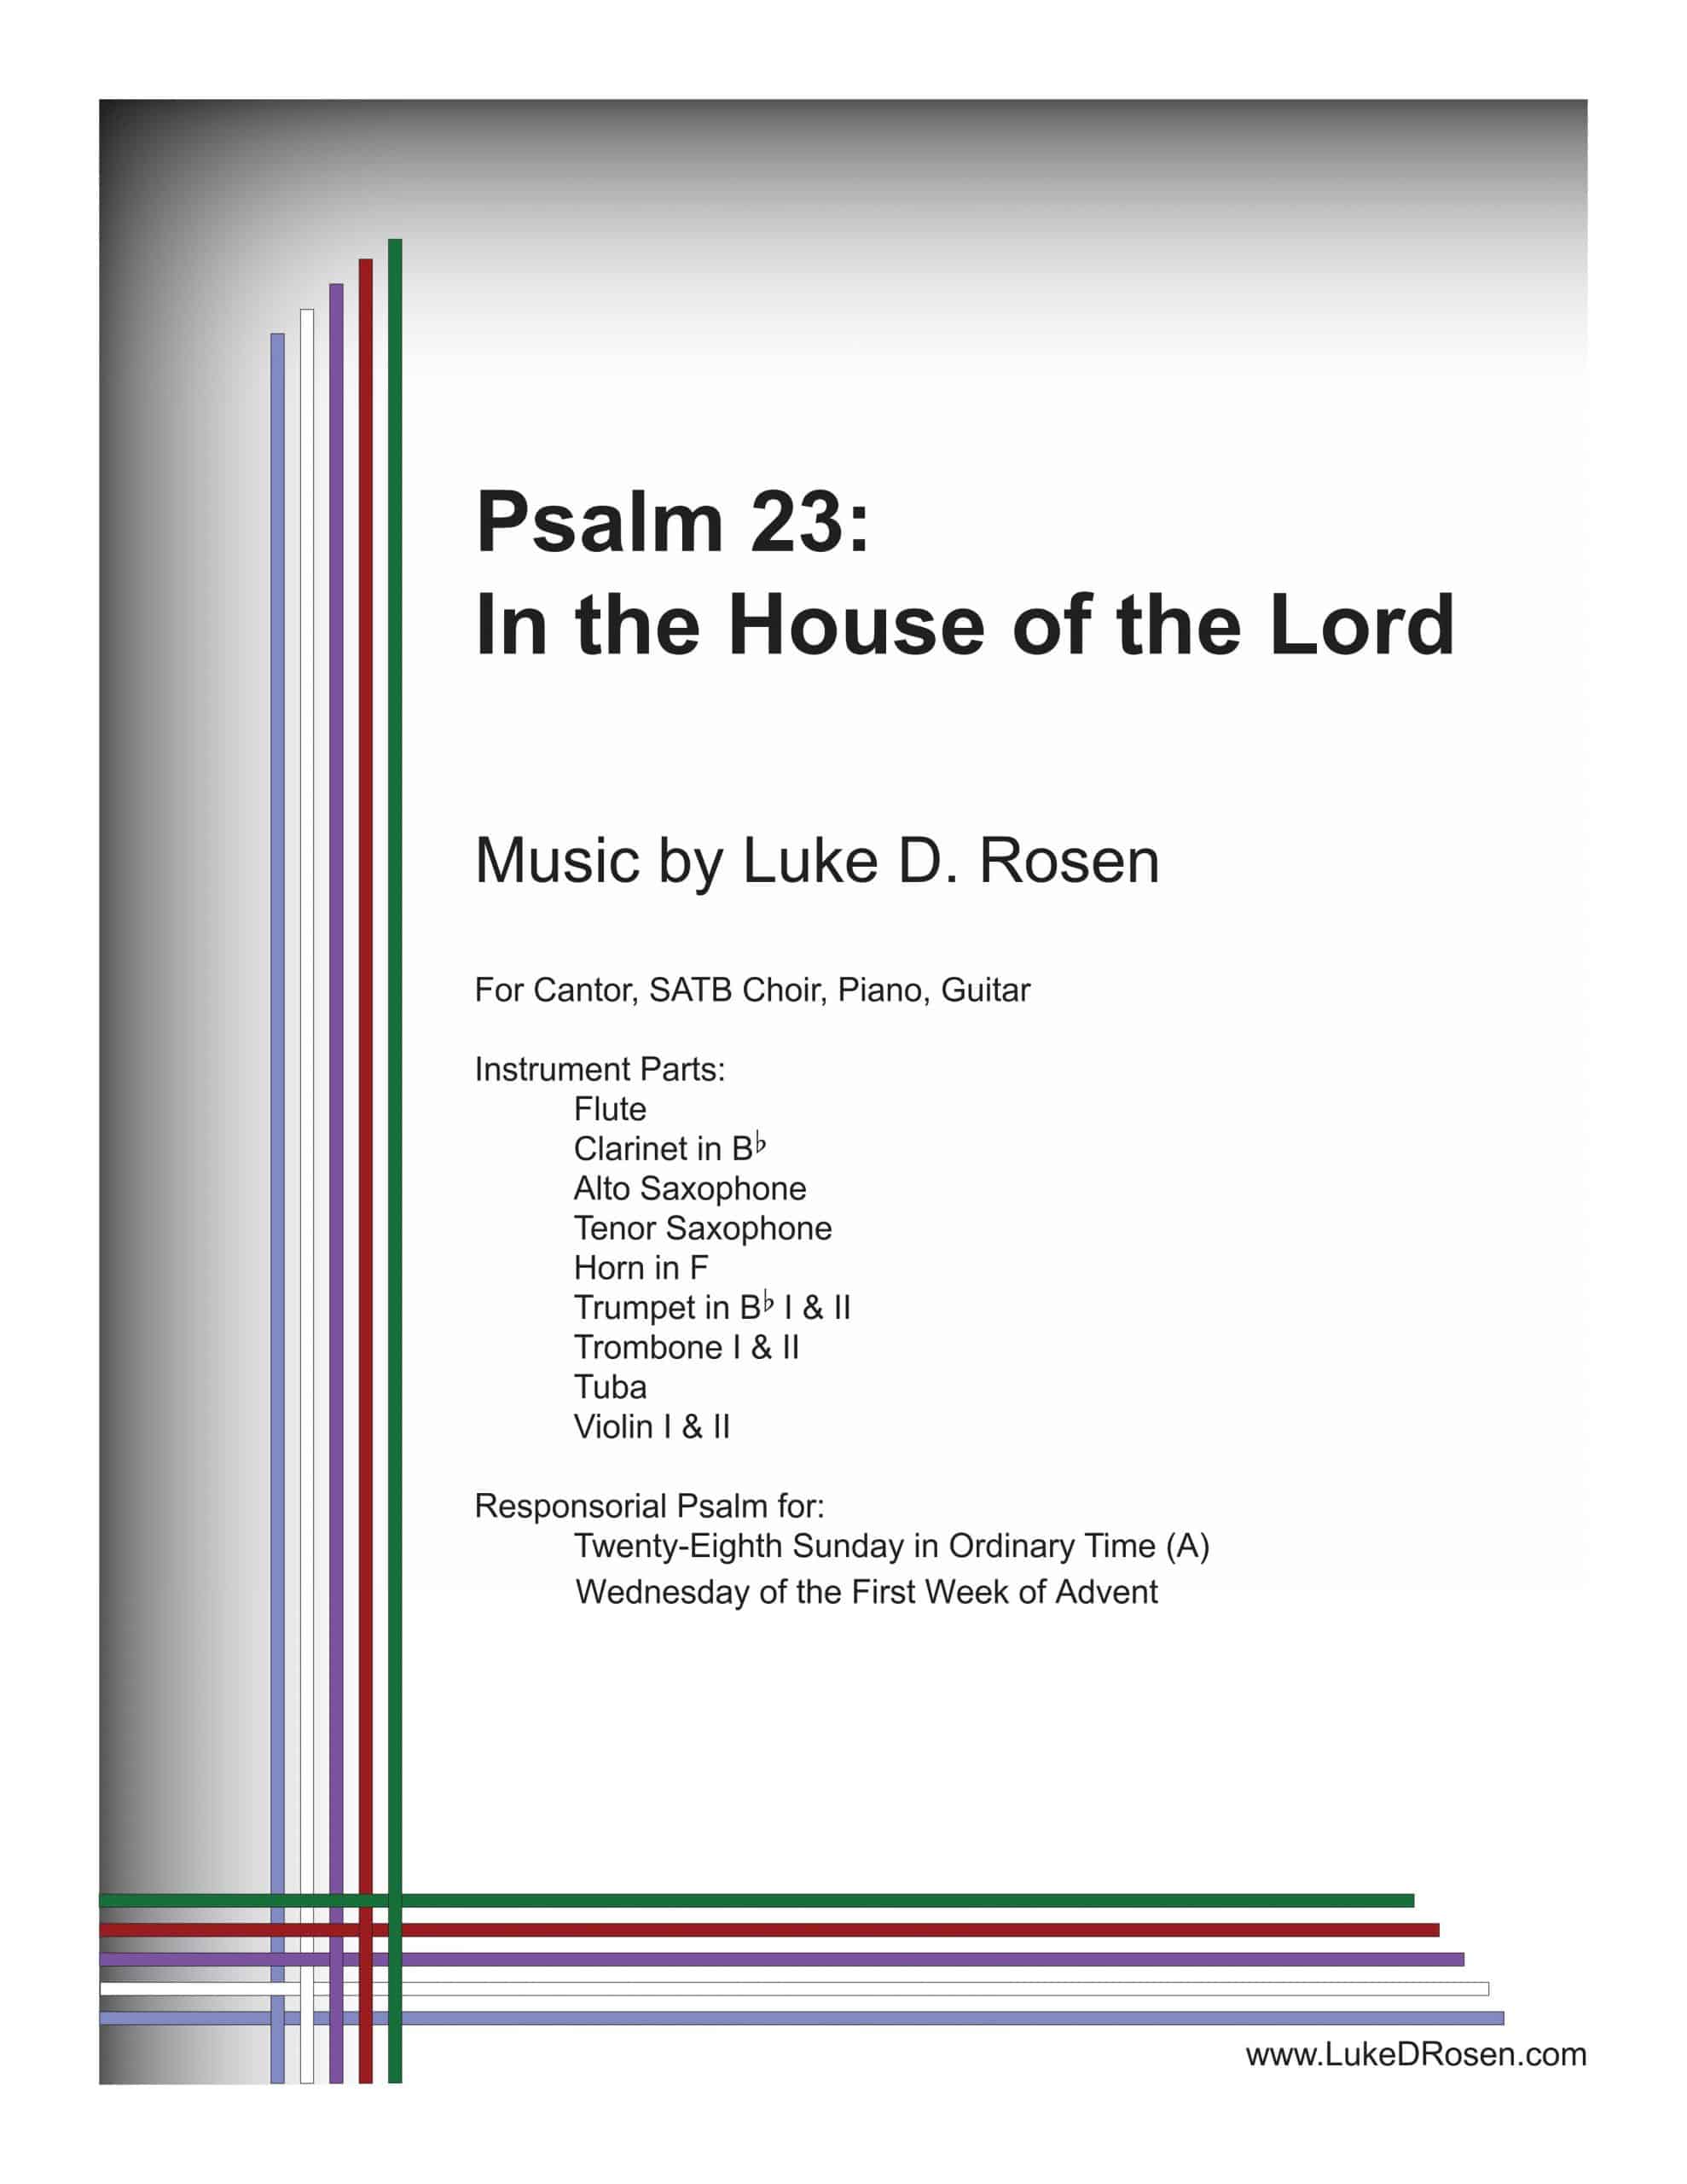 Psalm 23 – In the House of the Lord (Rosen)